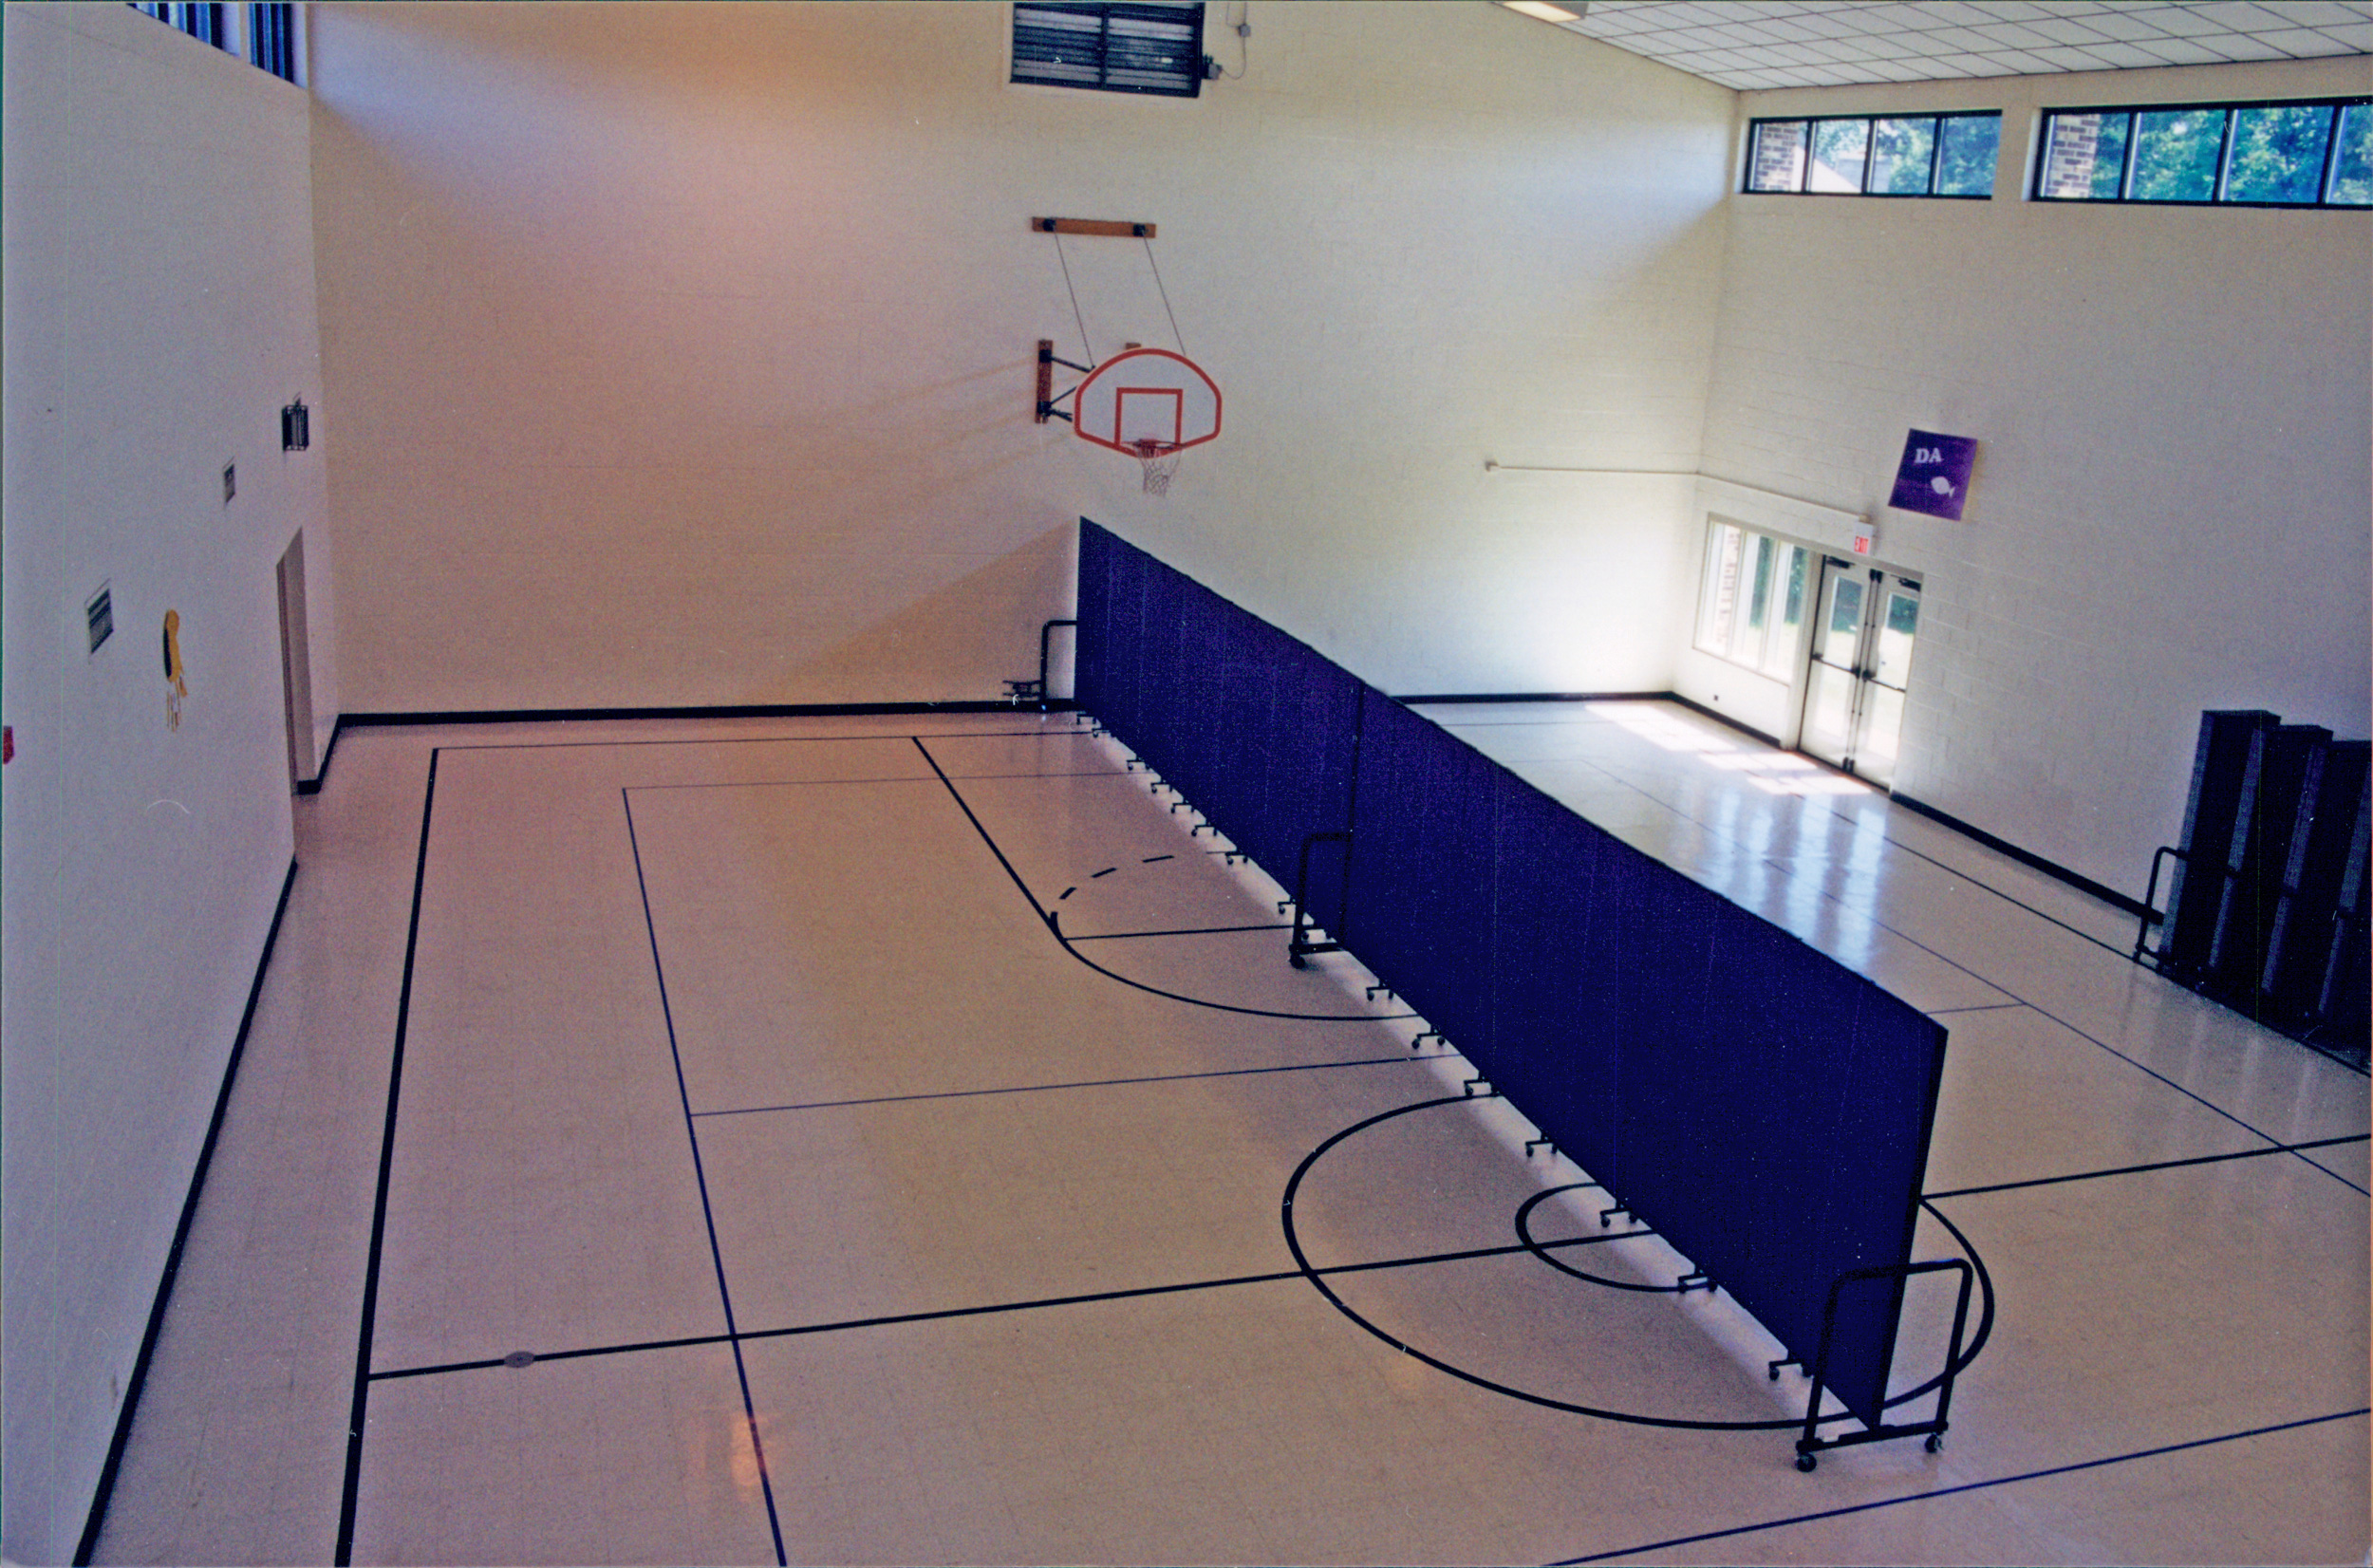 Gym is first divided in half lengthwise using two 24'-1" long dividers